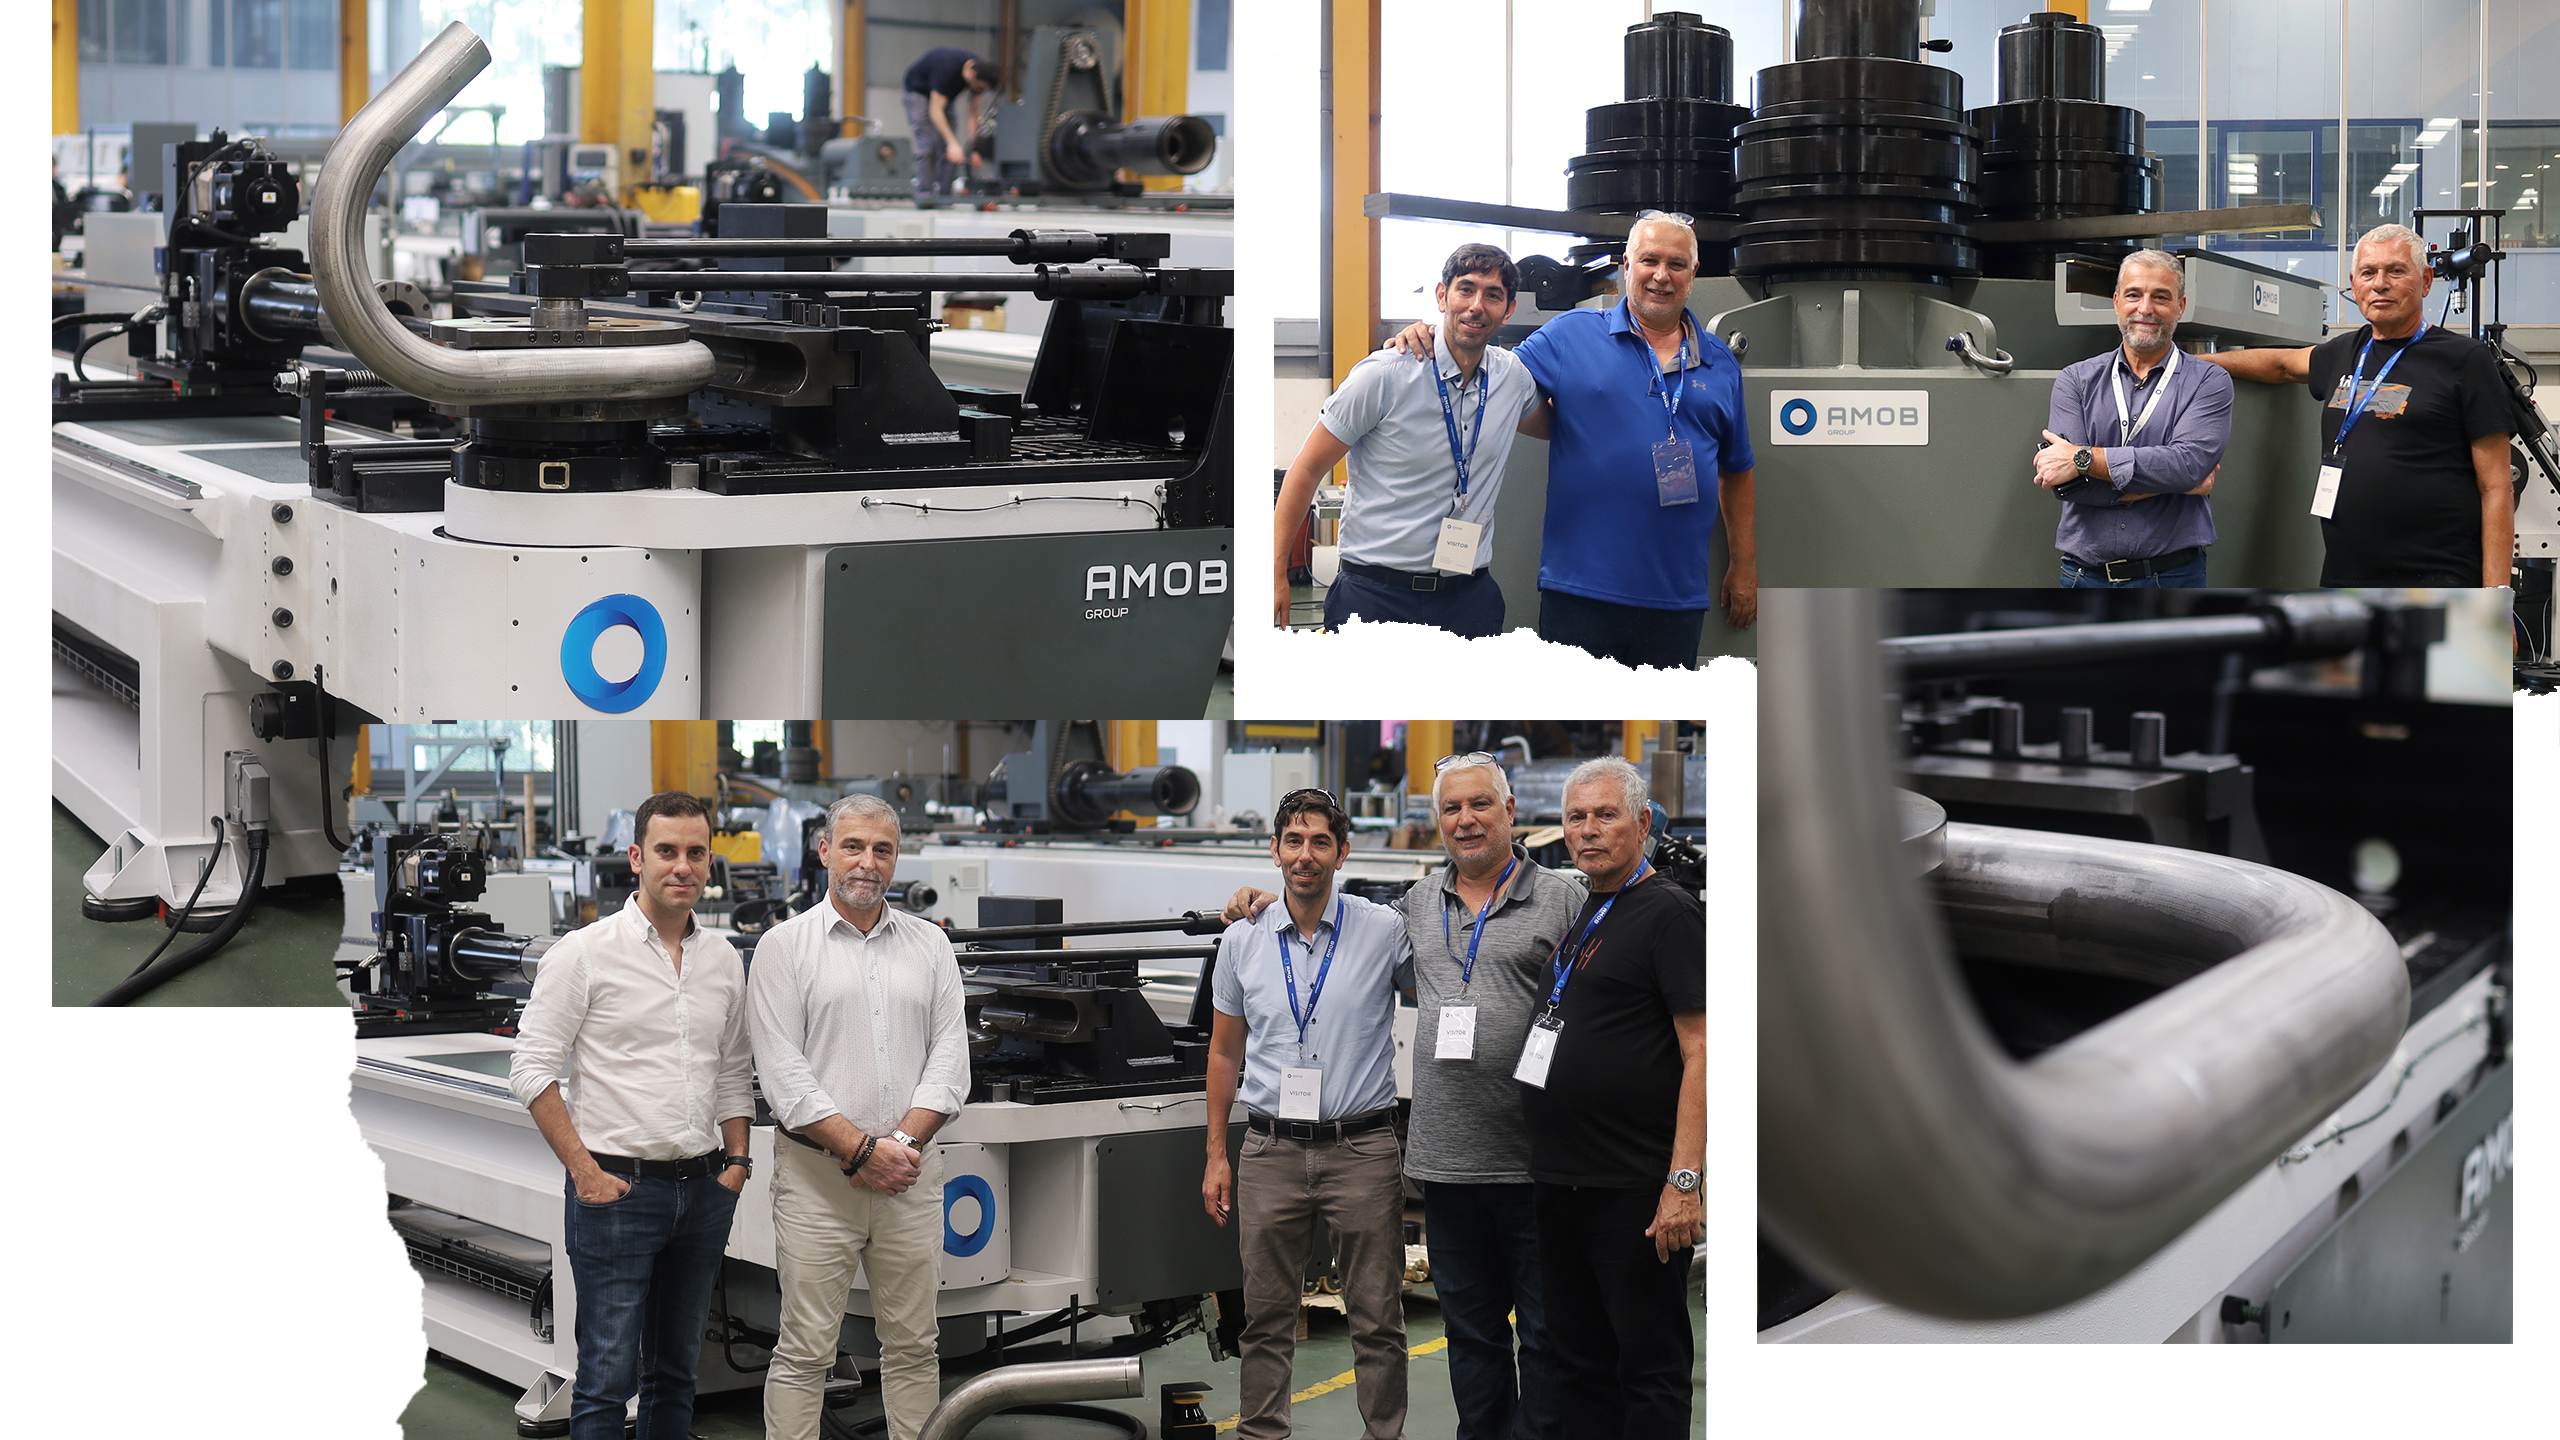 The Gal Kifuf company in Israel is now equipped with its third AMOB machine.